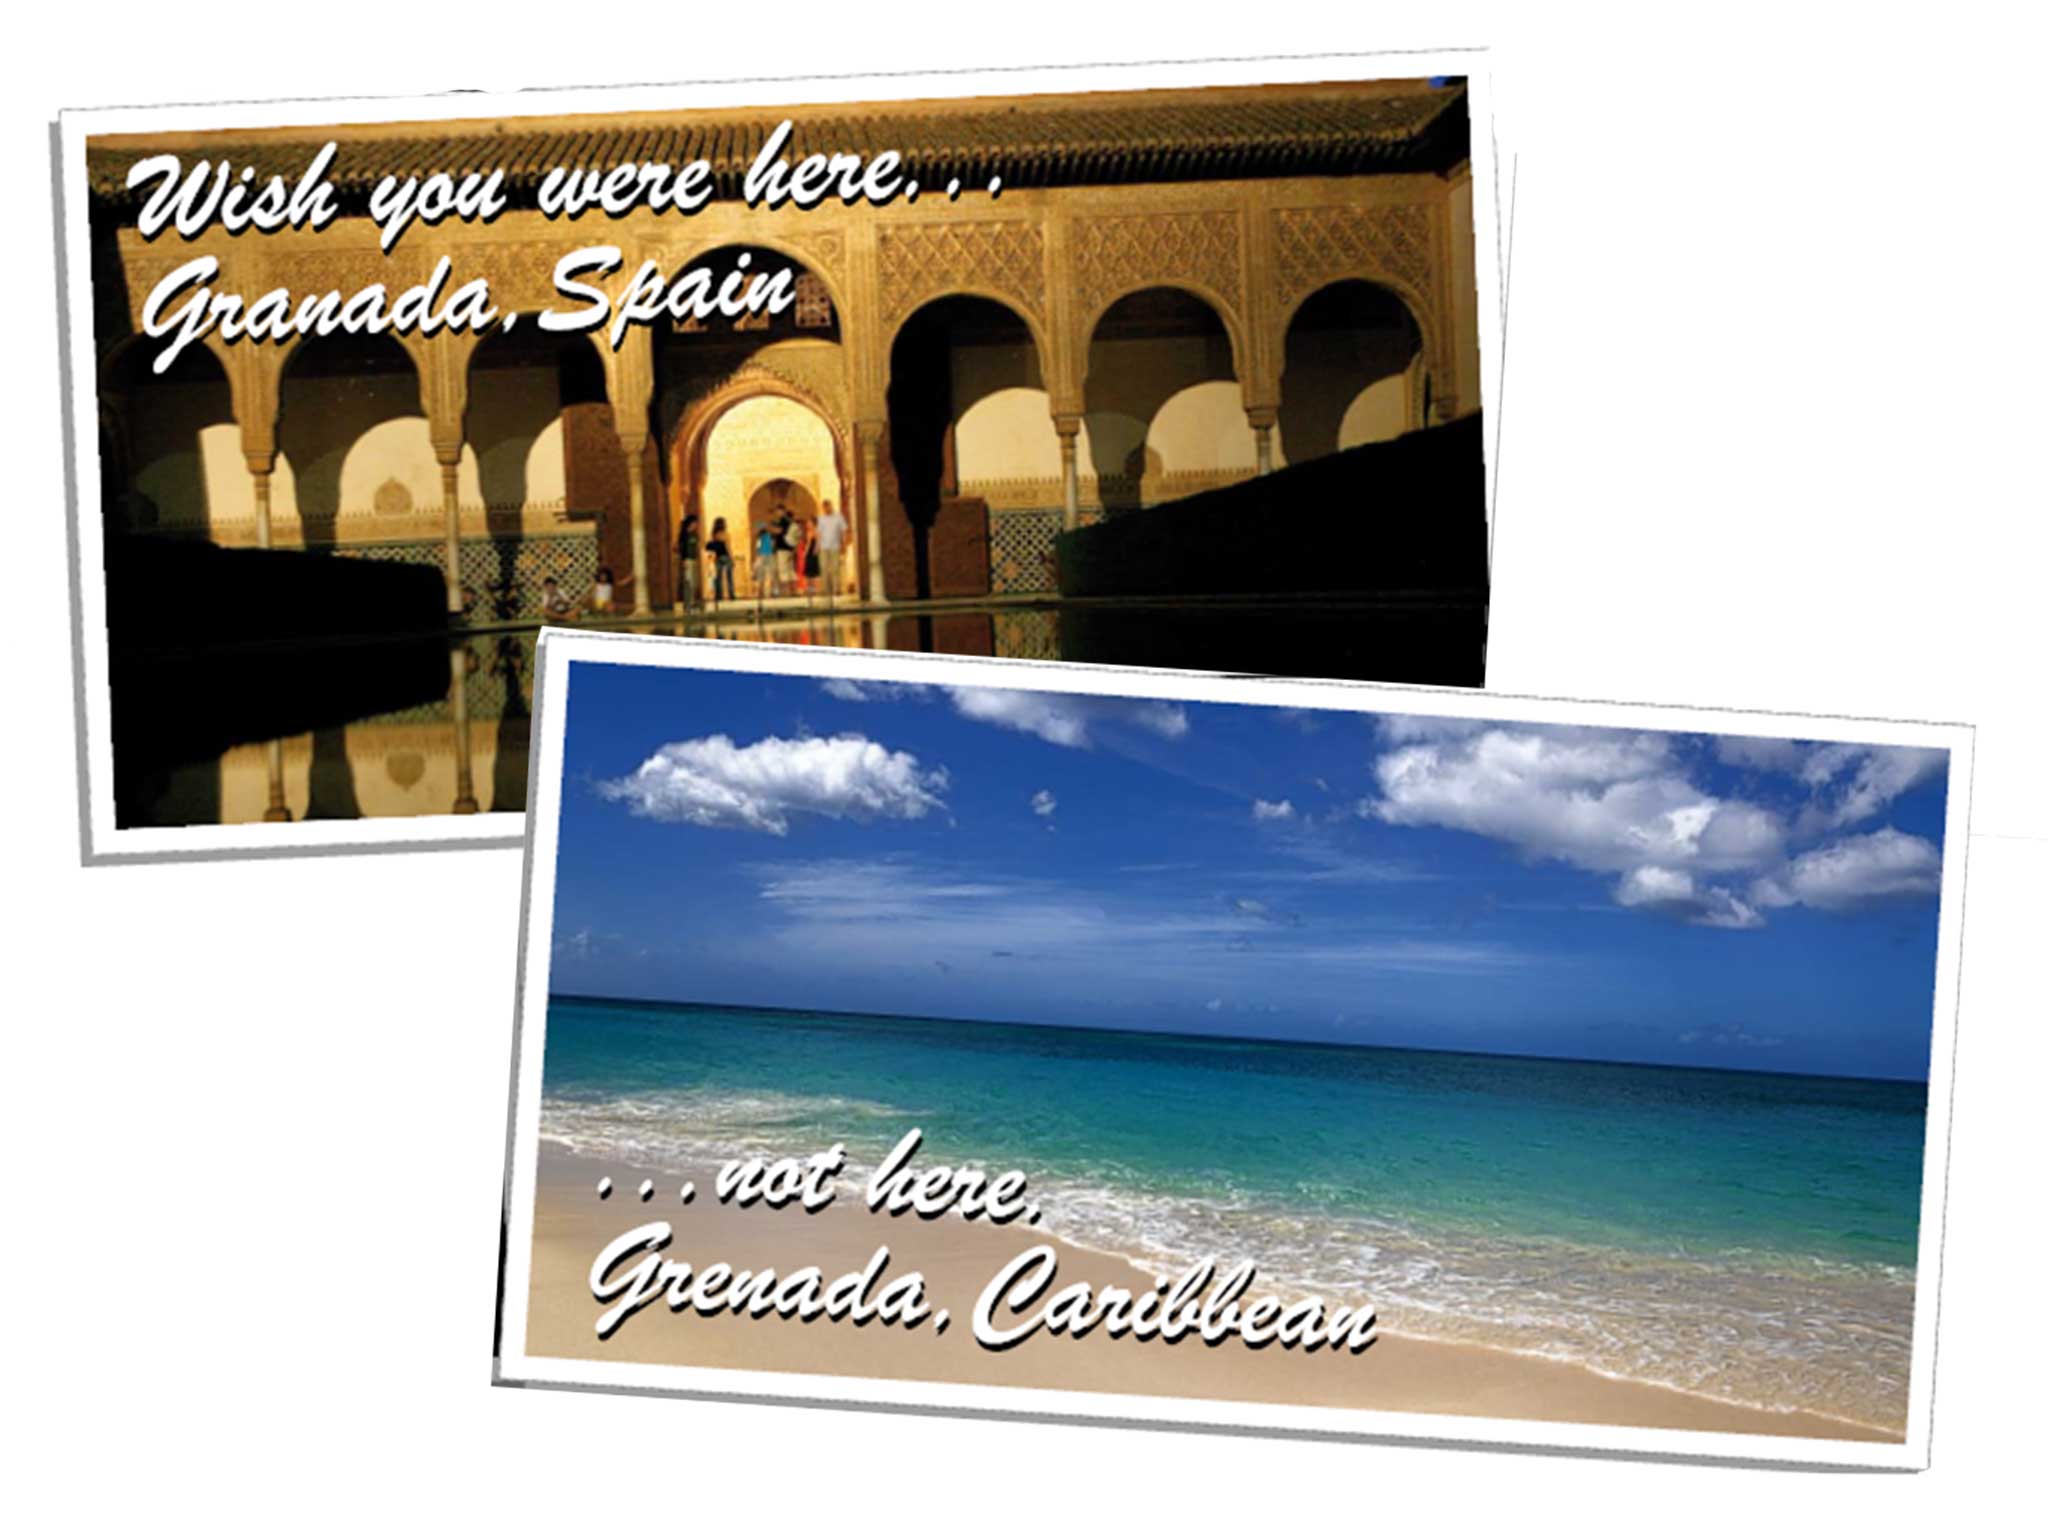 Wish you were here, not there: Mr Gamson flew to Grenada, bottom, not Granada, top